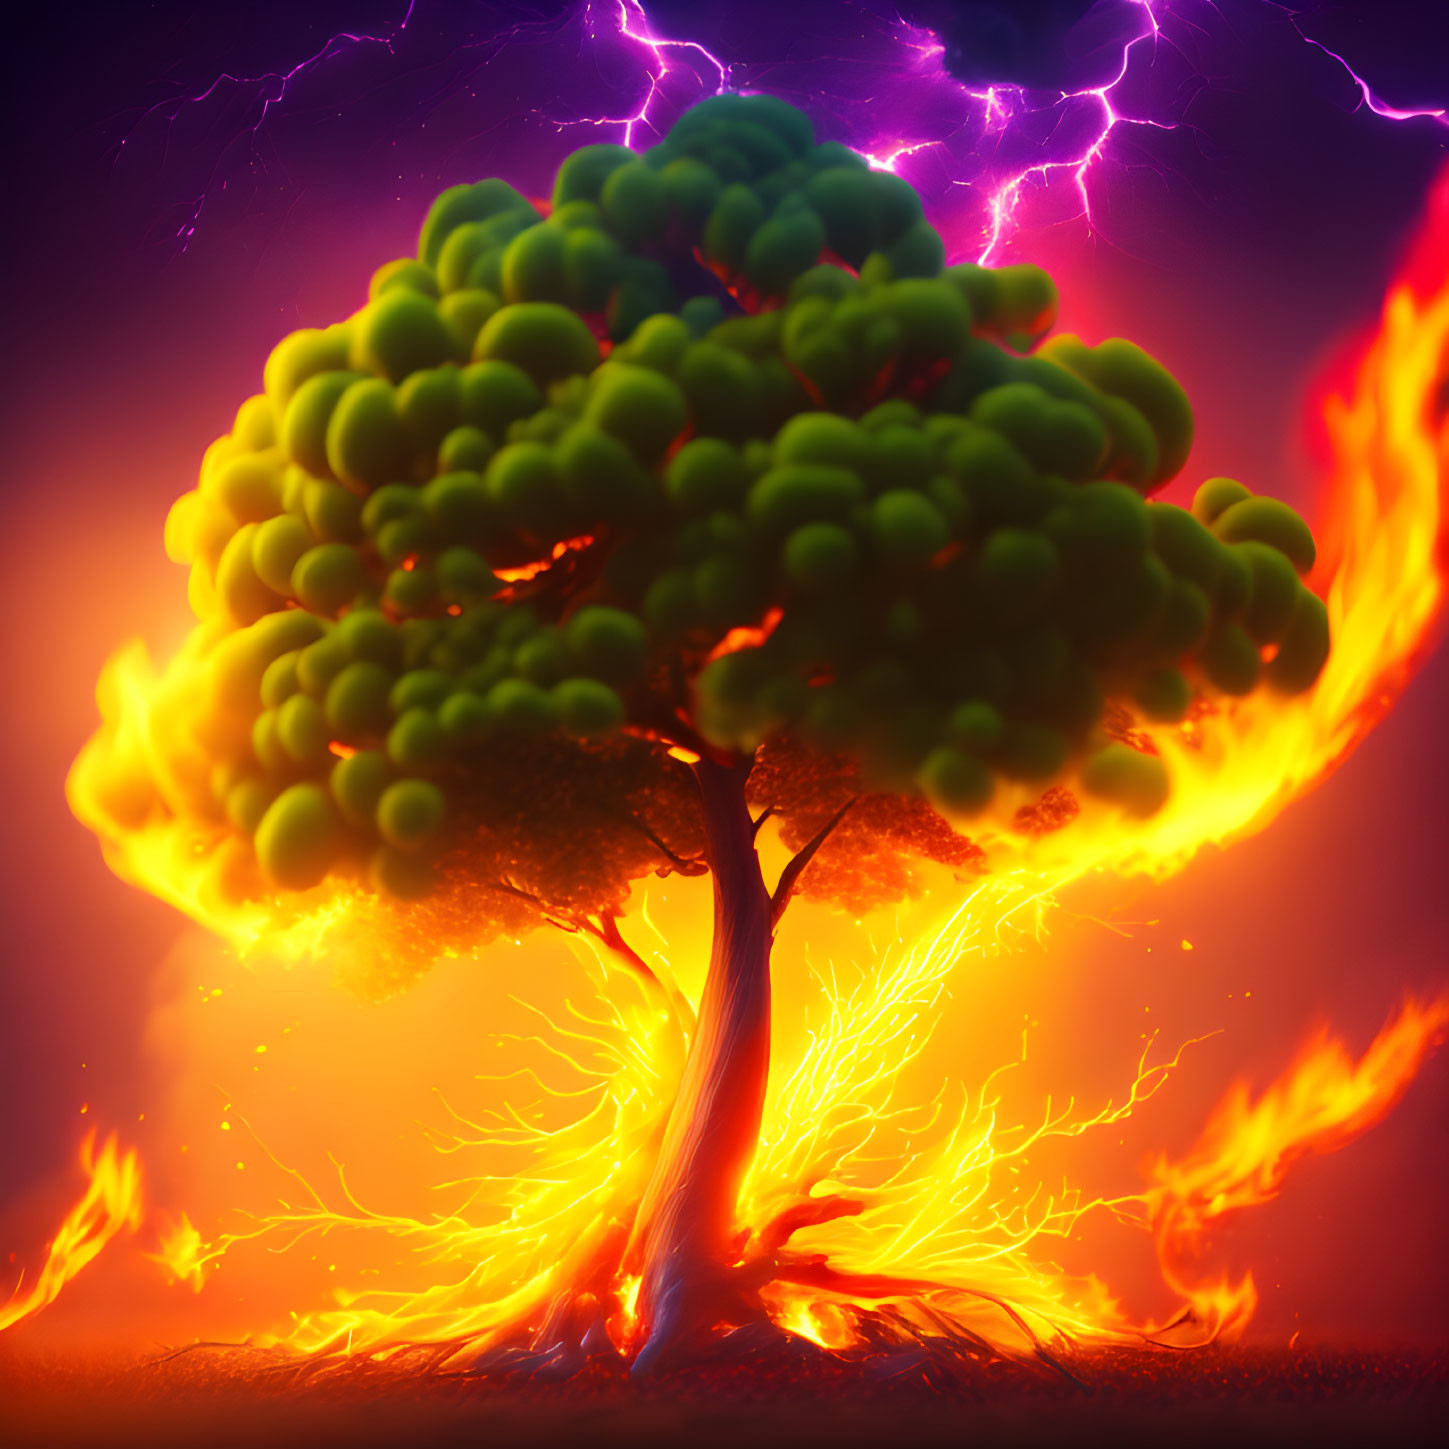 Tree with green foliage engulfed by intense flames against dramatic purple lightning.